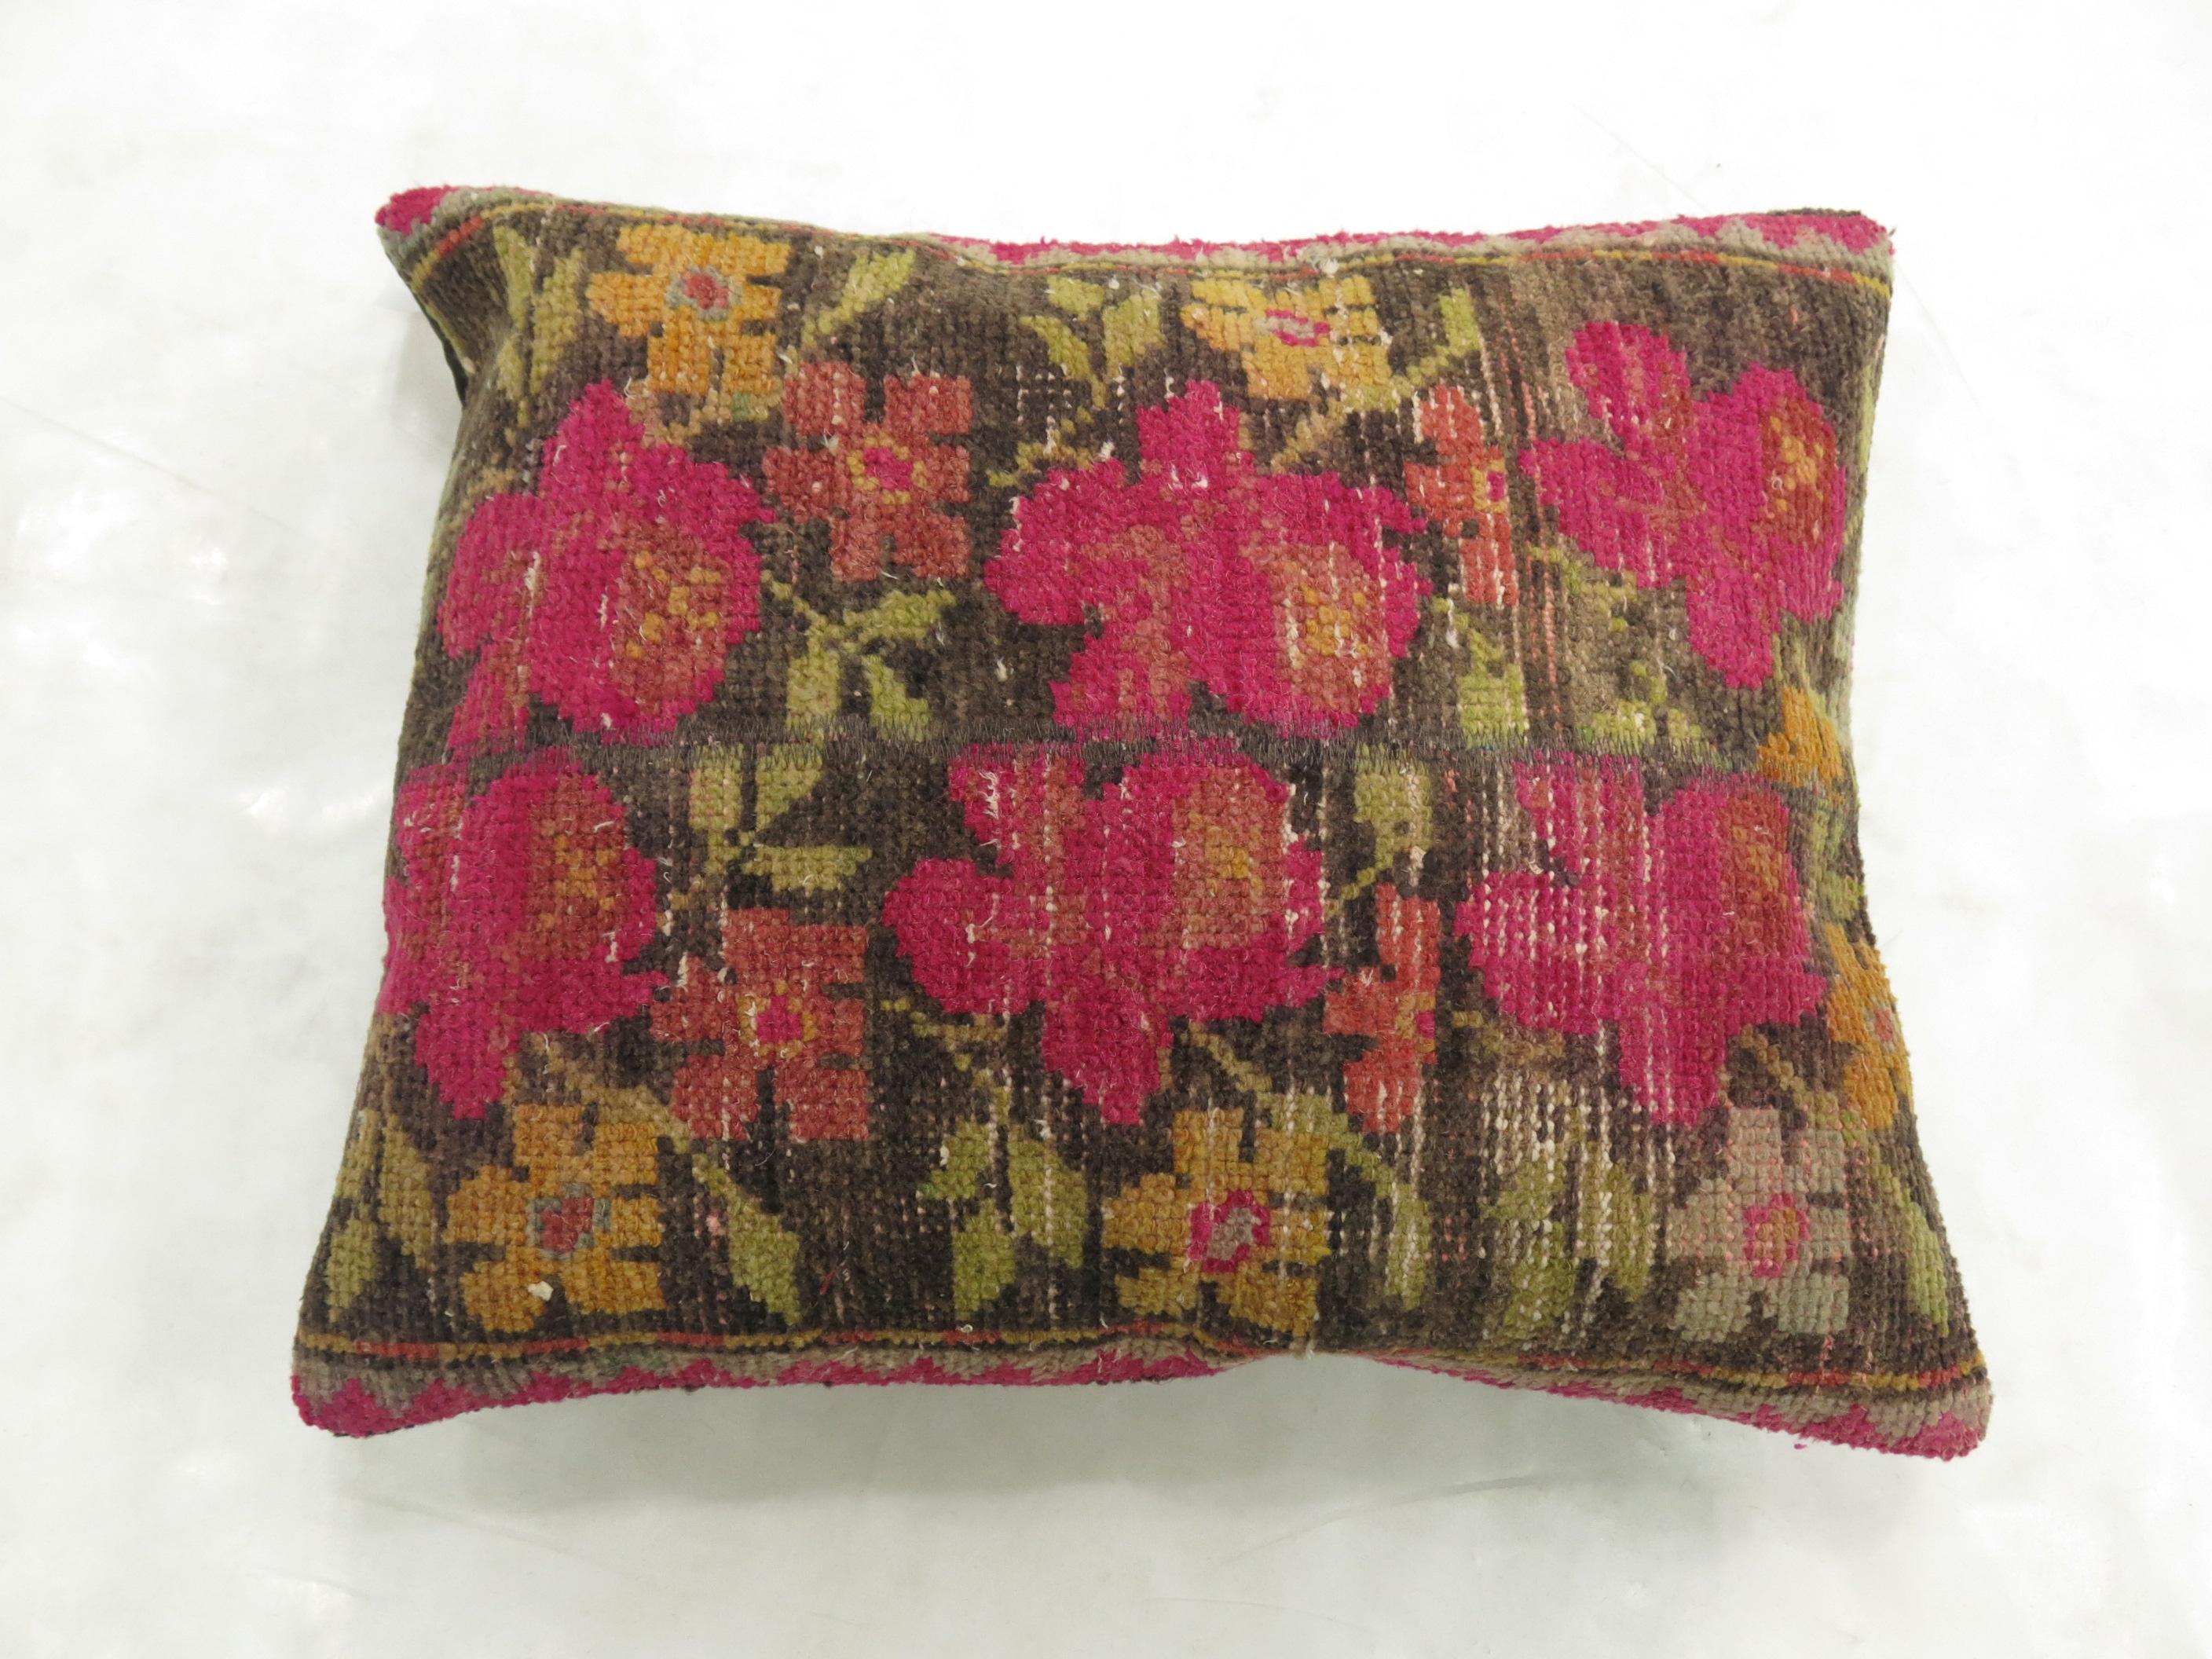 A large pillow made from a Turkish deco rug with a cotton back and zipper closure included. Bright pink and brown are the predominant colors

Measures: 19